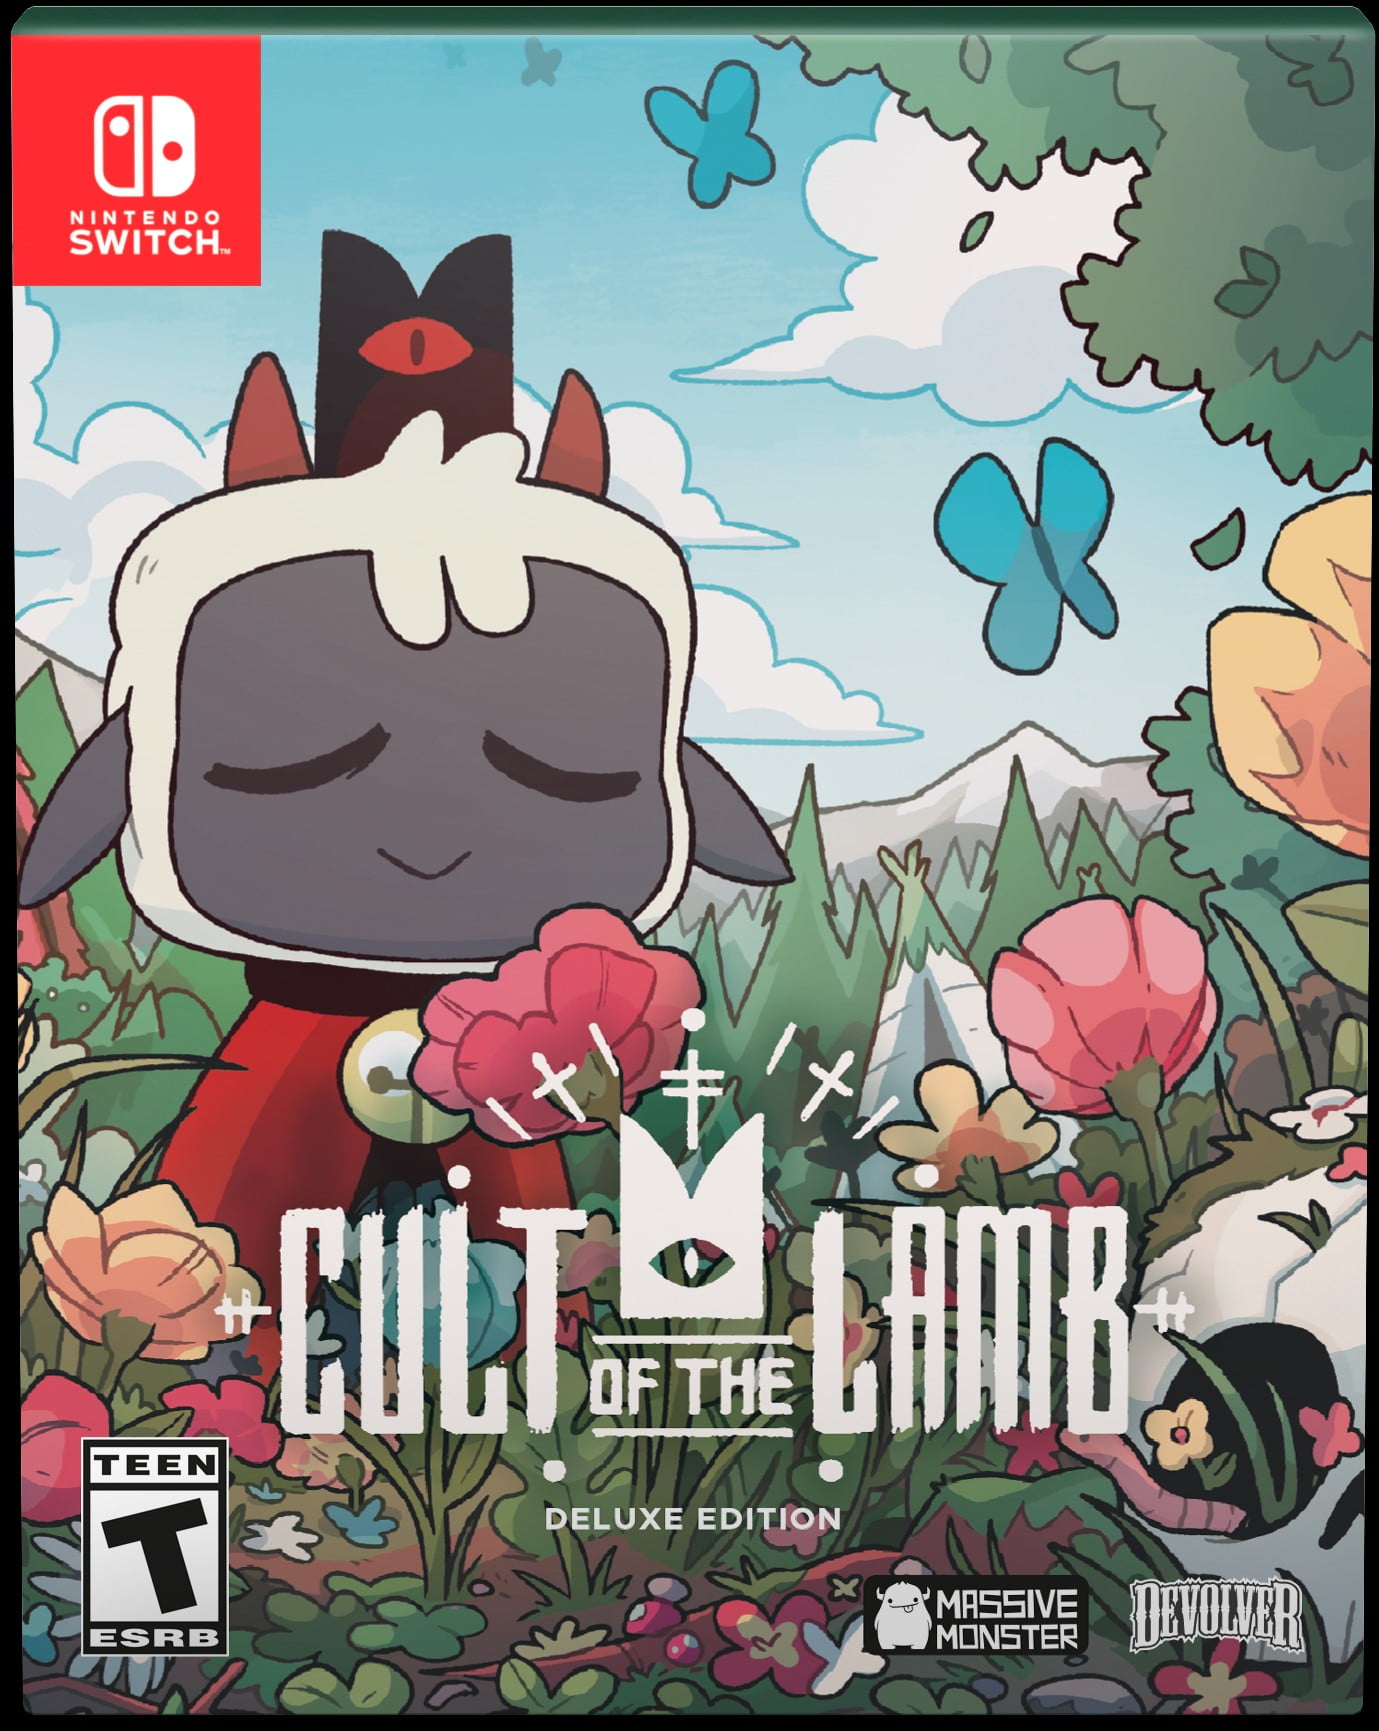 Switch, Edition, Nintendo Digital, 812303019333 of Cult Devolver the Deluxe Lamb